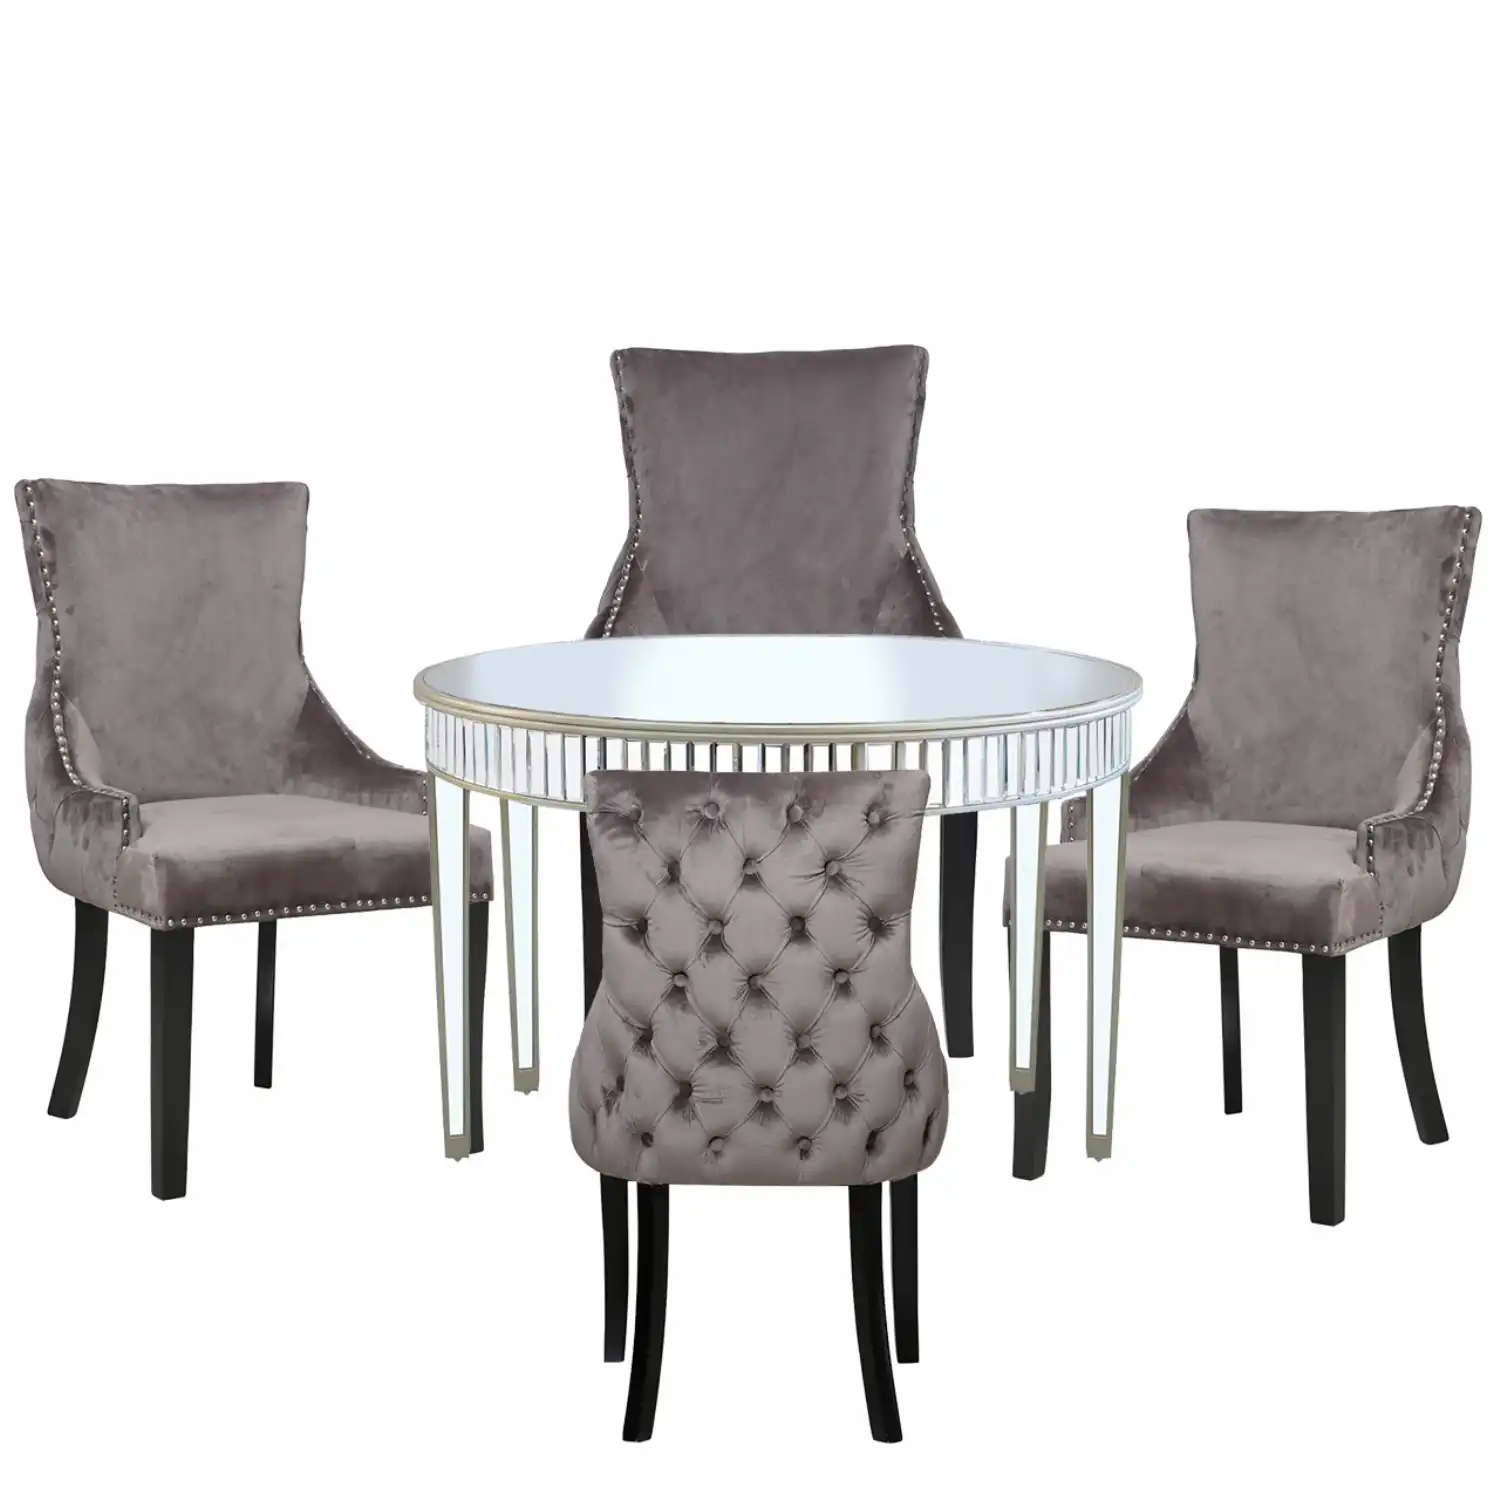 Champagne Mirrored 120cm Round Dining Set 4 Grey Chairs